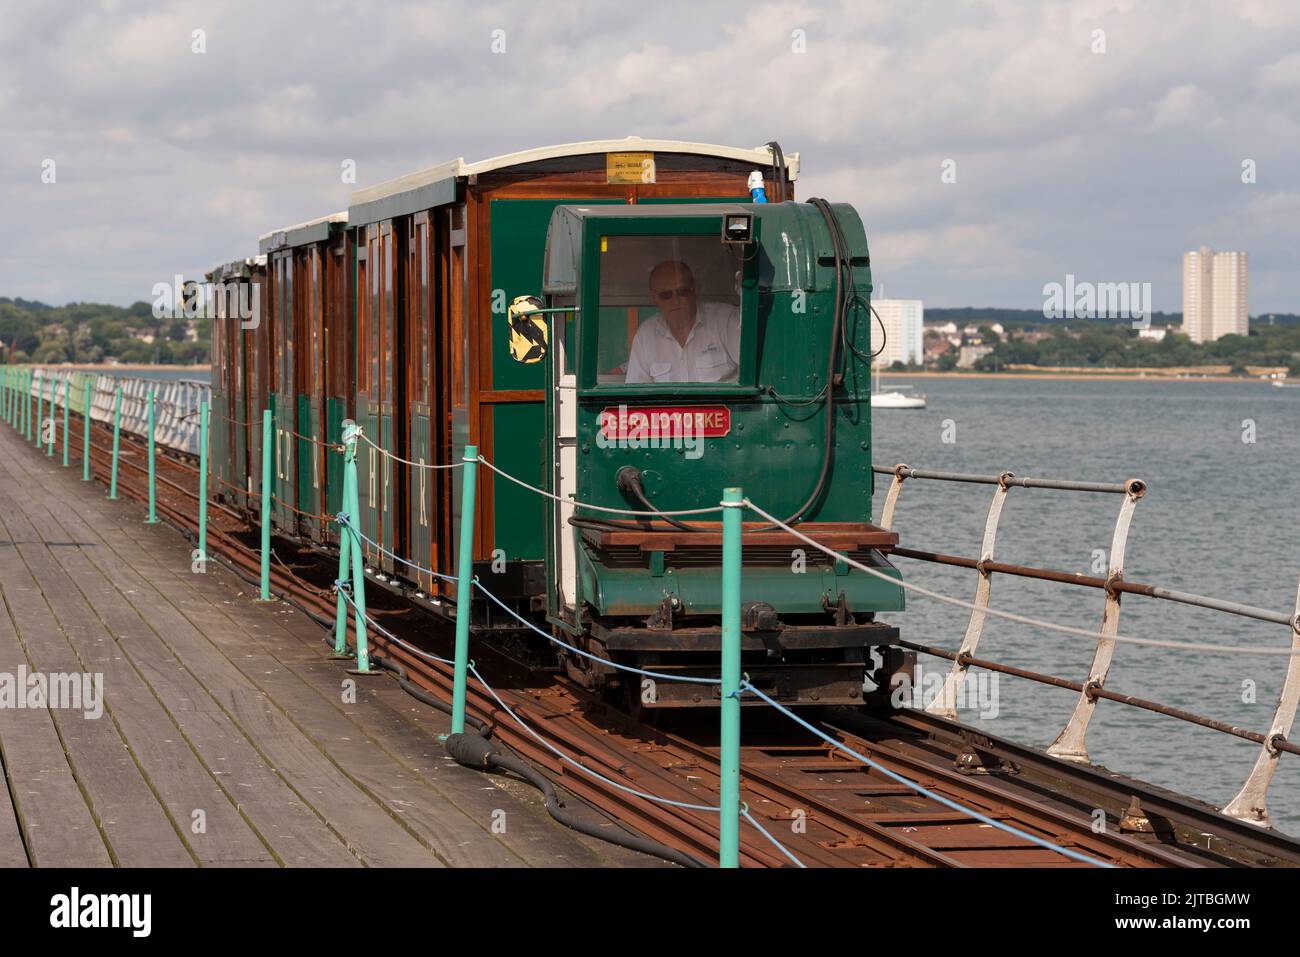 Southampton Water, southern England, UK. 2022. Tractor unit Gerald Yorke and passenger coaches on Hythe Pier on Southampton Water. The train transport Stock Photo